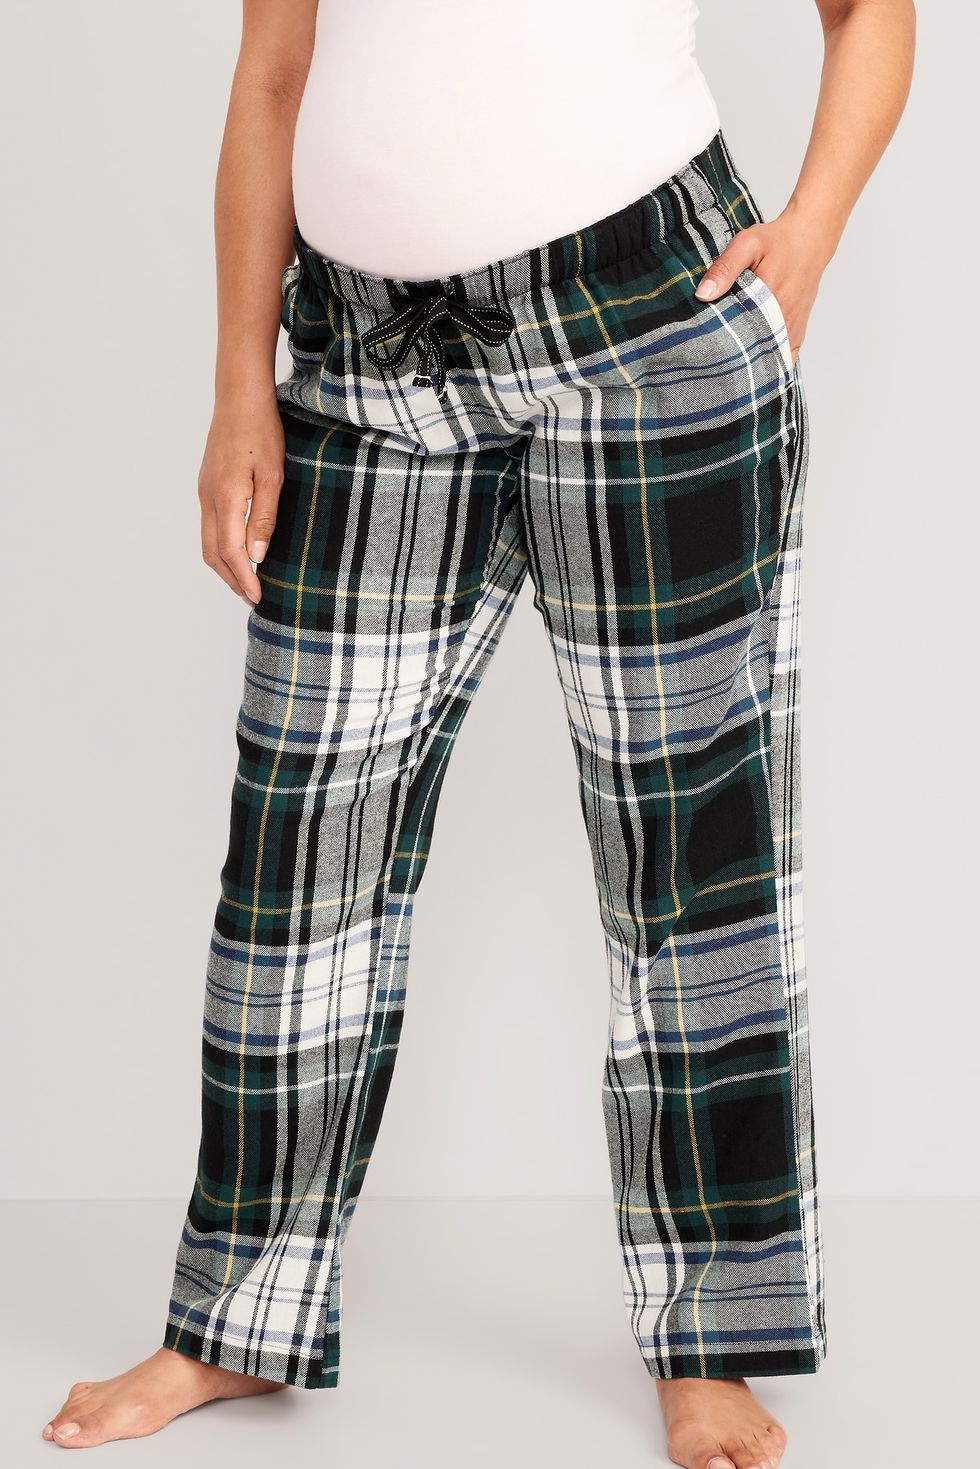 Women's Pajama Pants With Pockets, Women's Soft Flannel Check